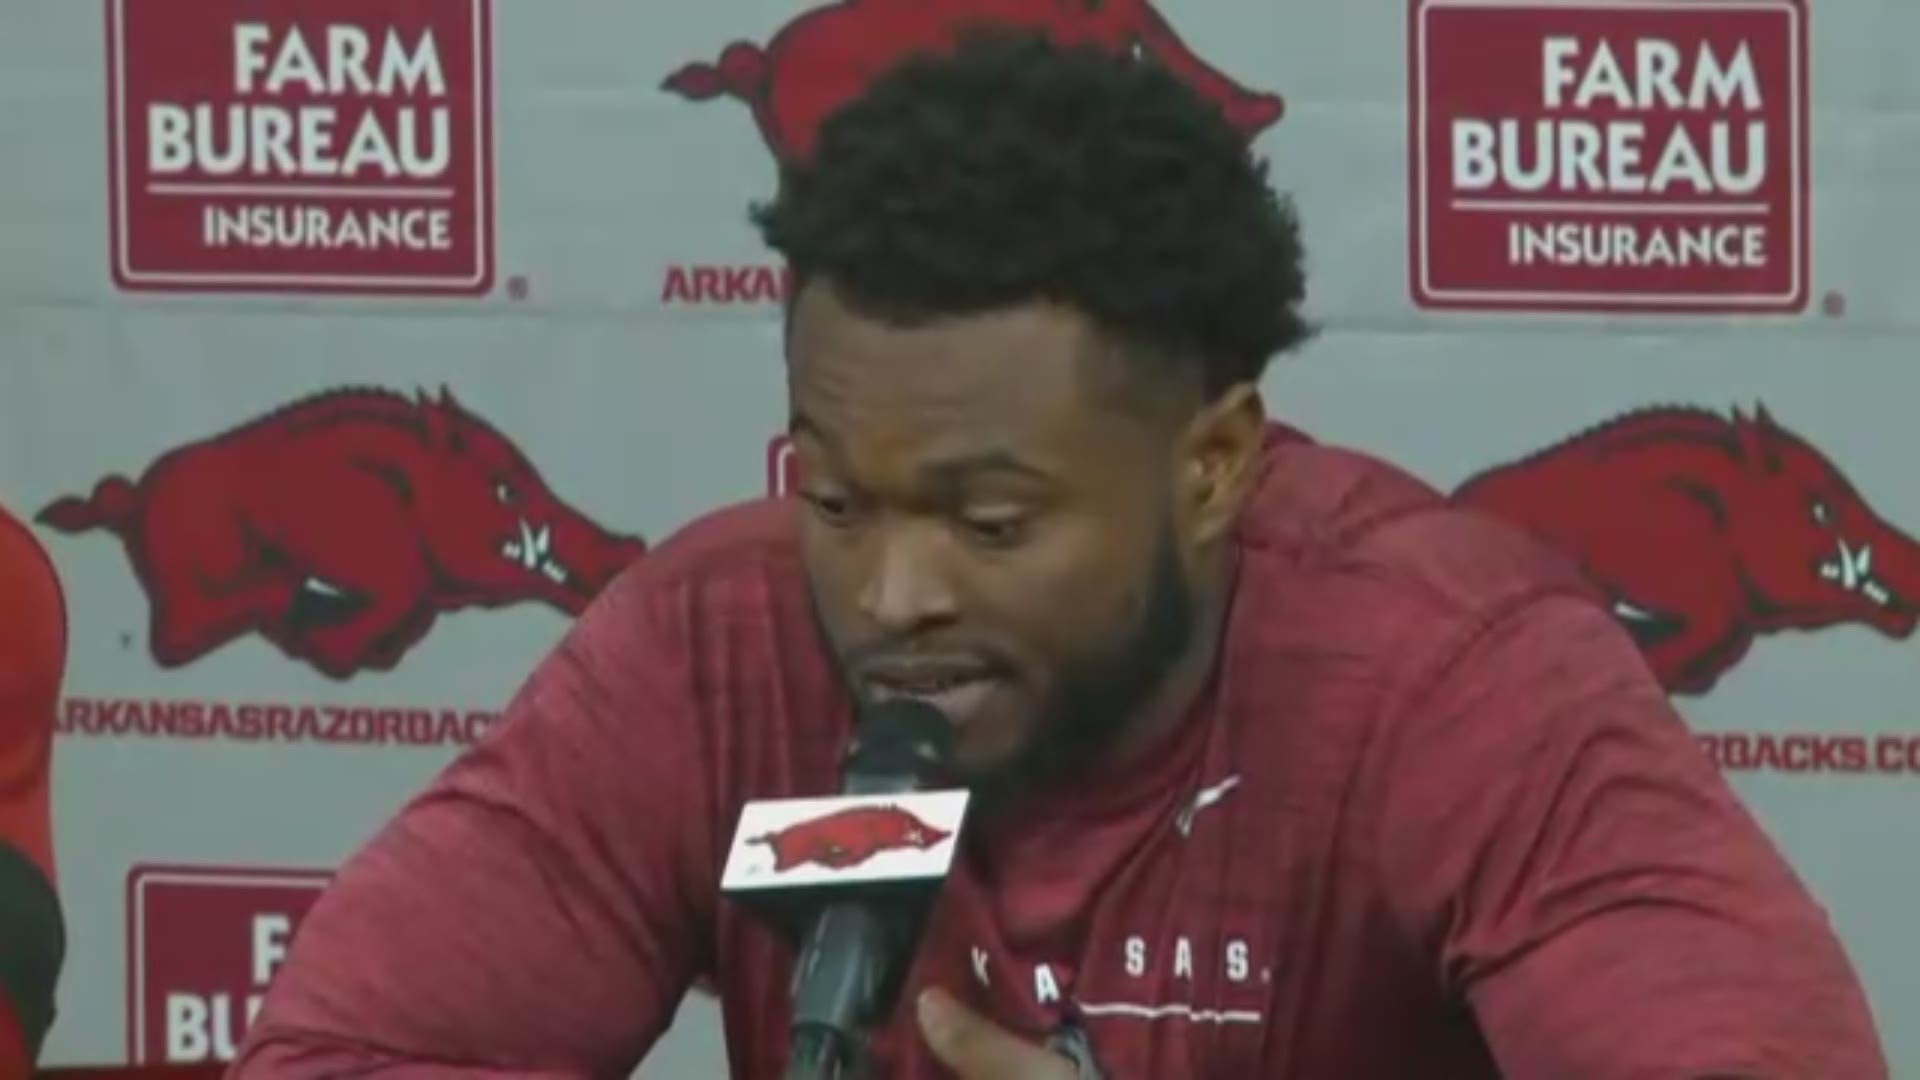 The Razorbacks lost to the Bulldogs Saturday, falling to 2-7 on the year and 0-5 in conference play